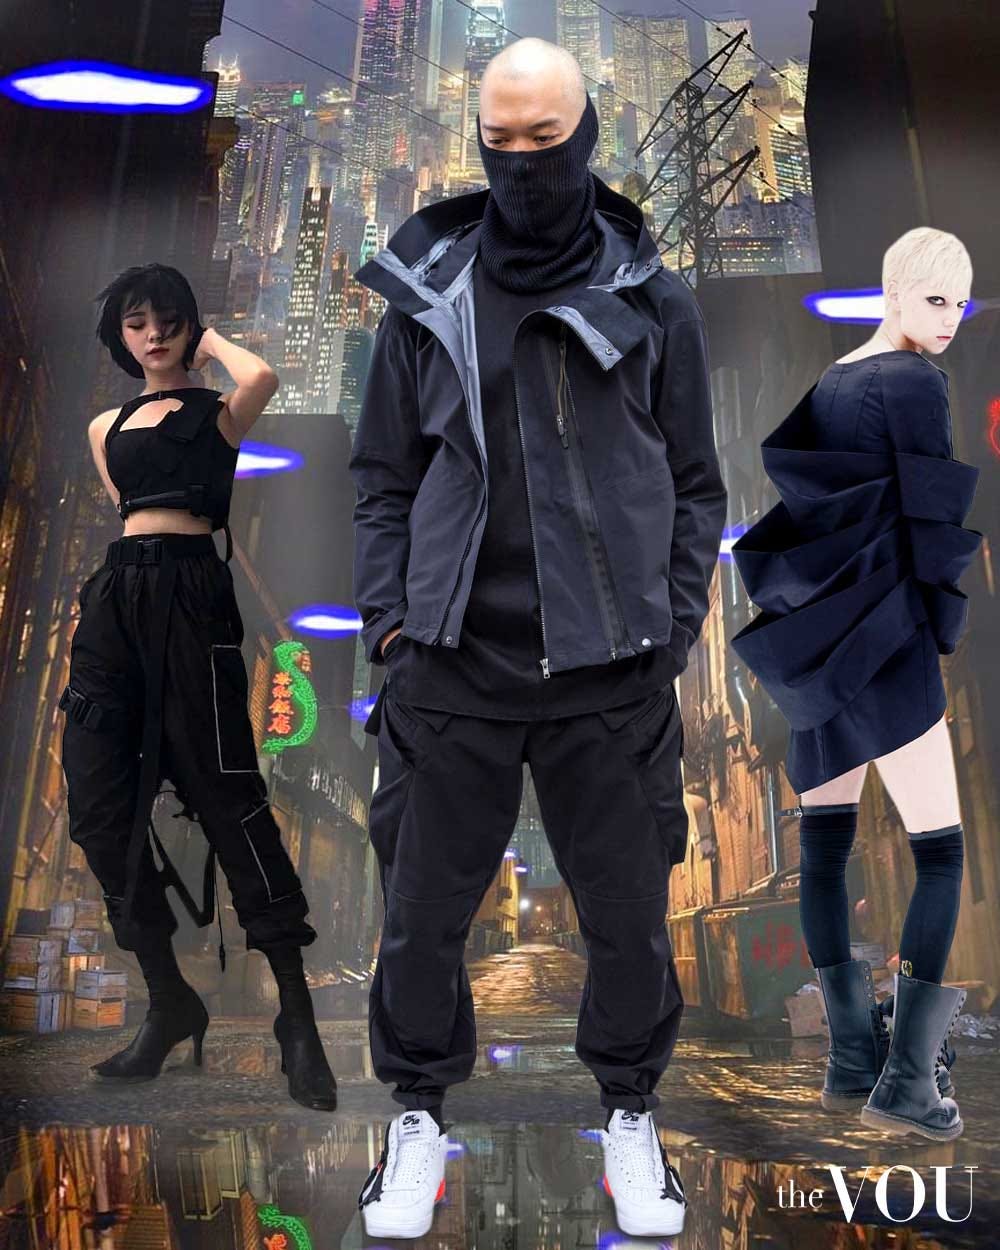 Cyberpunk Clothing & Outfits for Women